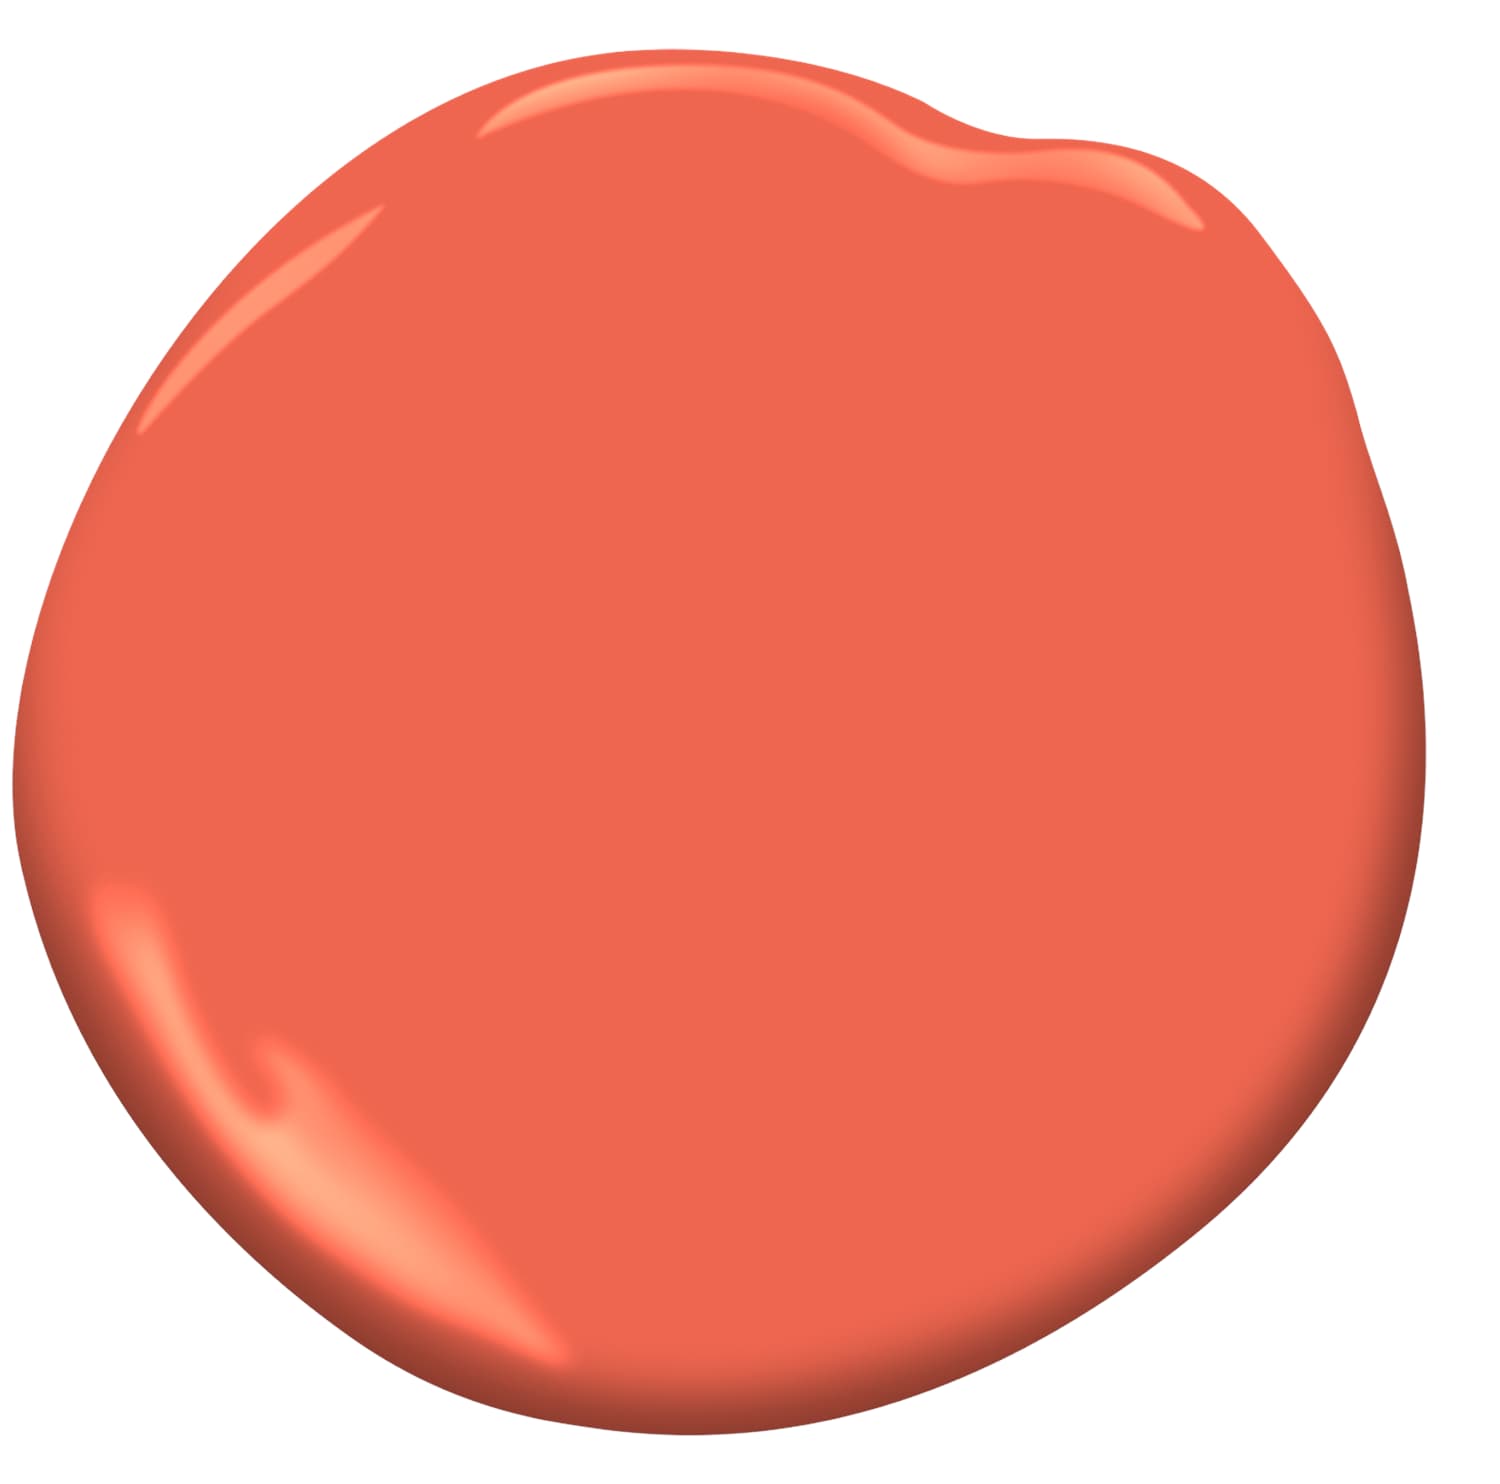 Love Living Coral? Here Are the Color Matches from 7 Paint Brands ...